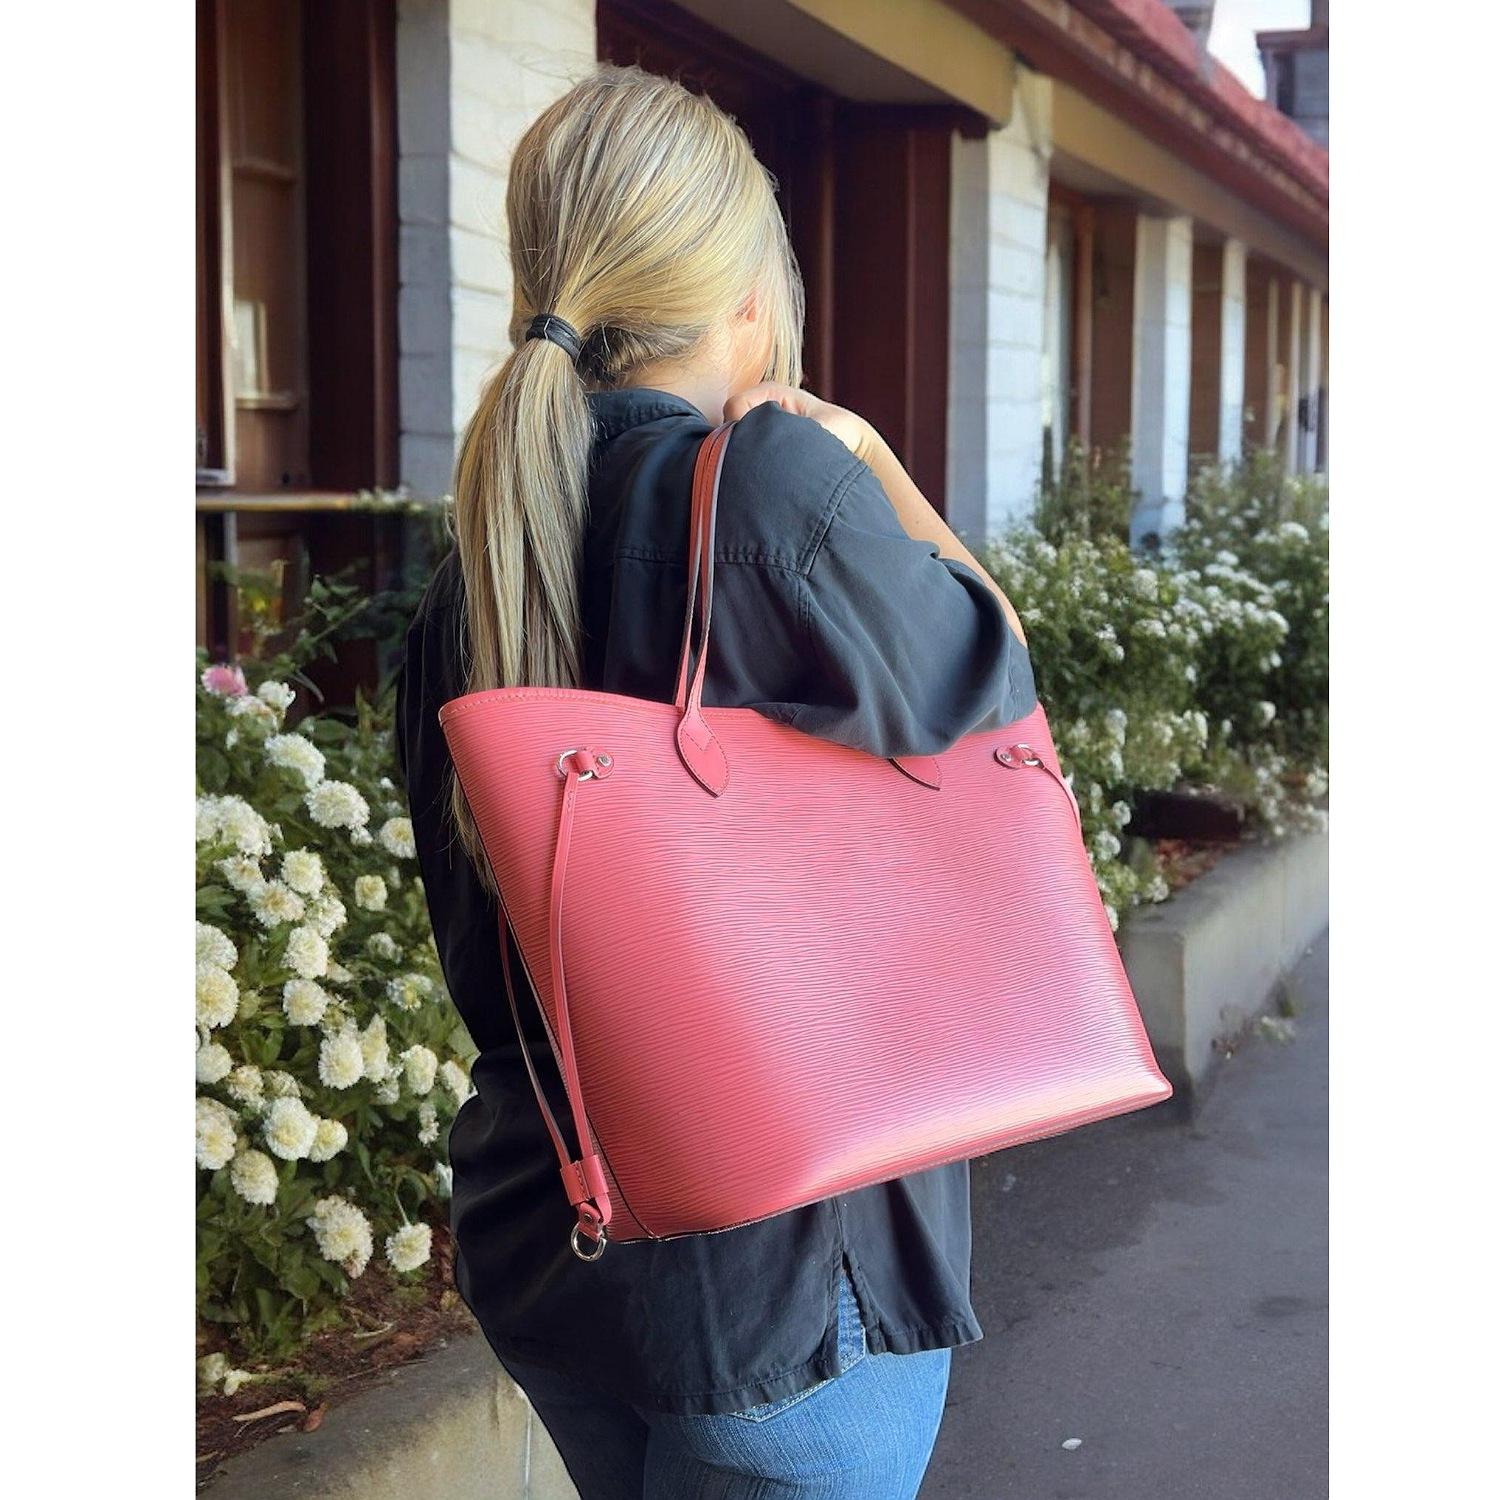 This stylish tote is crafted of signature Epi textured leather in coral in the medium size. The tote features smooth cowhide leather top strap handles, trim and side cinch cords with polished silver hardware. The wide top is open to a matching suede